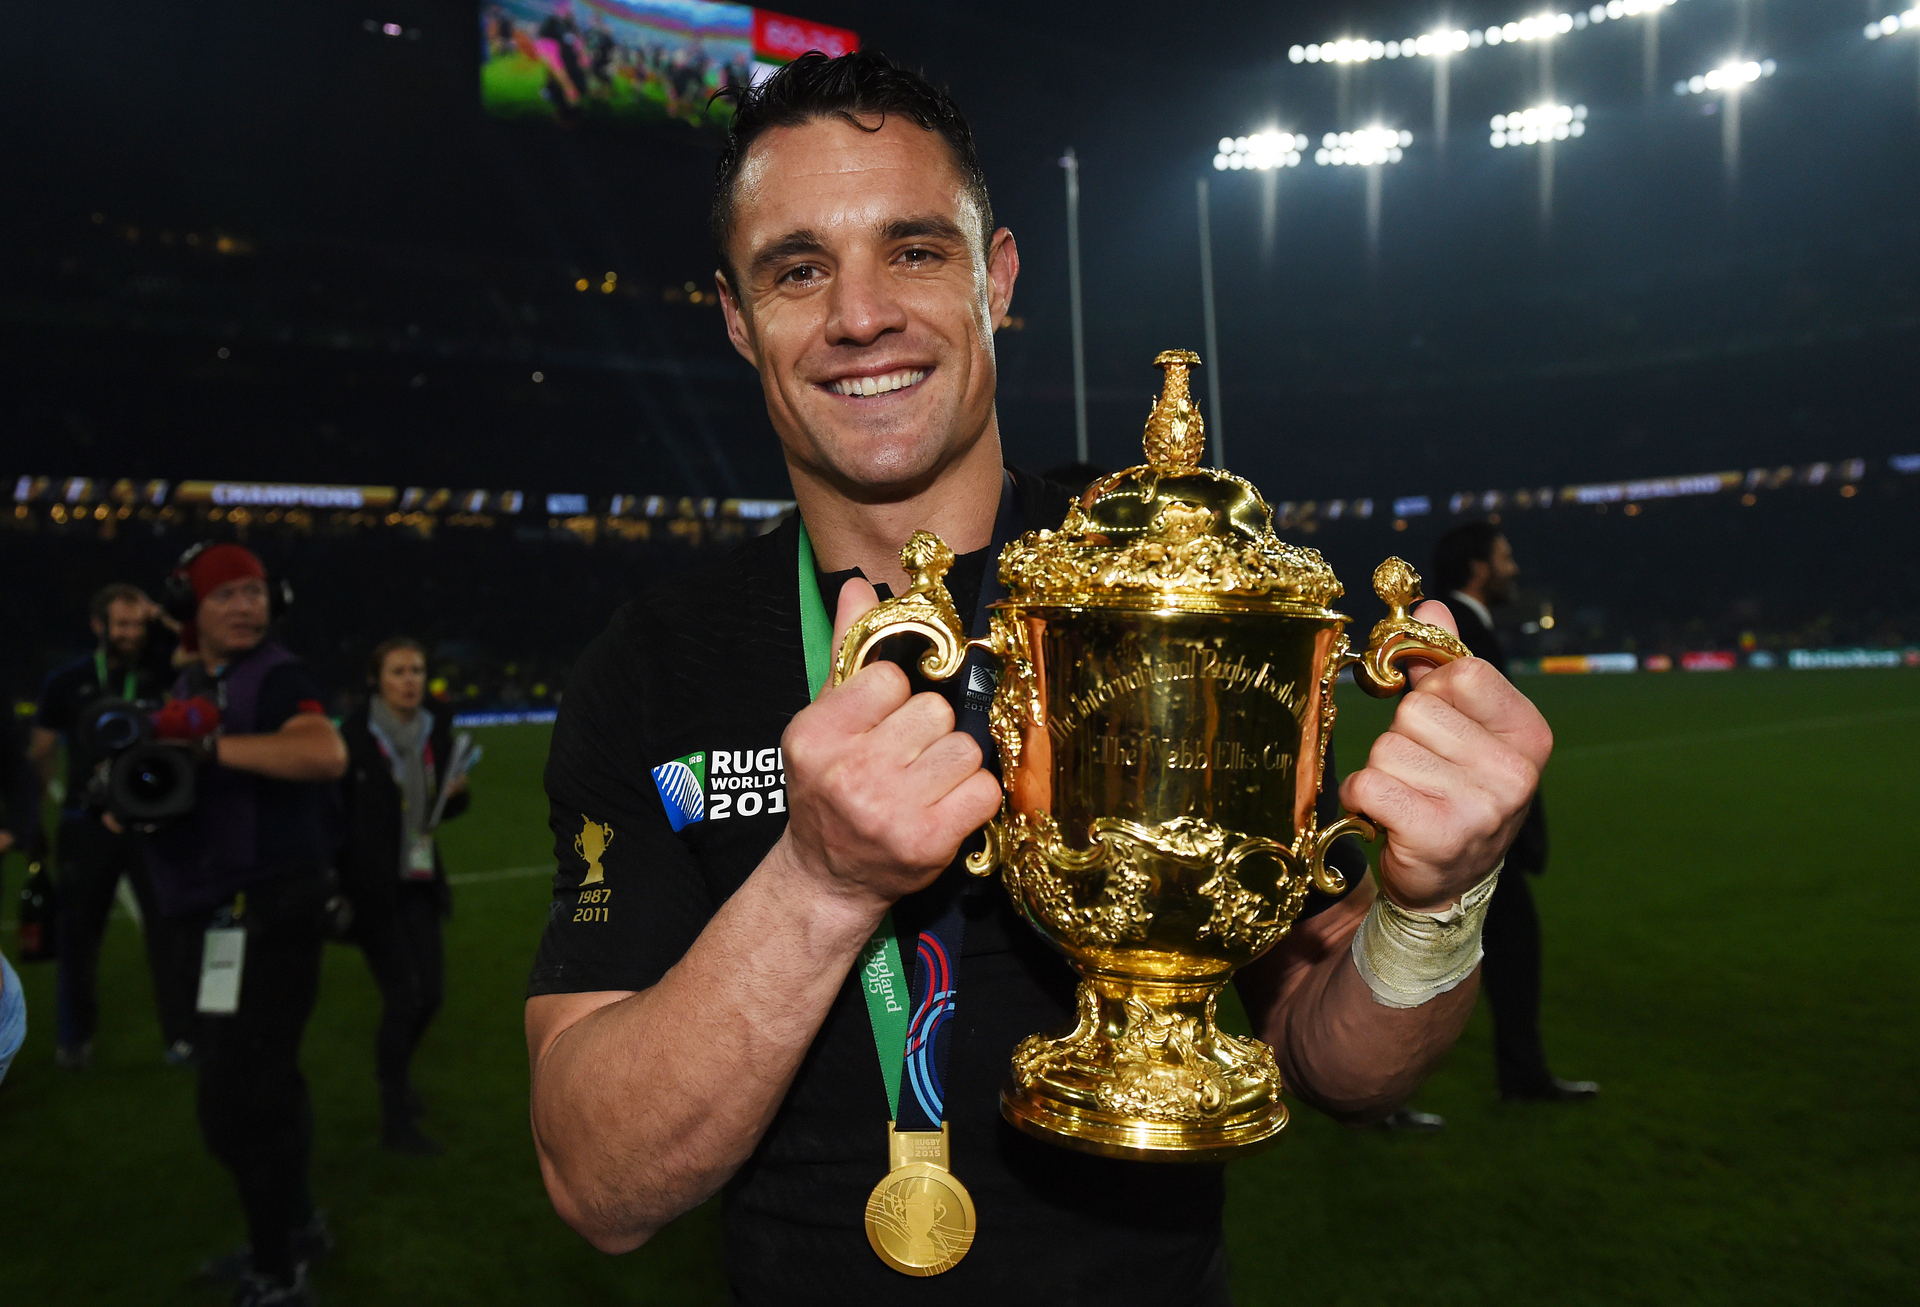 Dan Carter on X: I officially retire from professional rugby today. A  sport I've played 32 years which has helped shape me into the person I am  today. I can't thank everyone